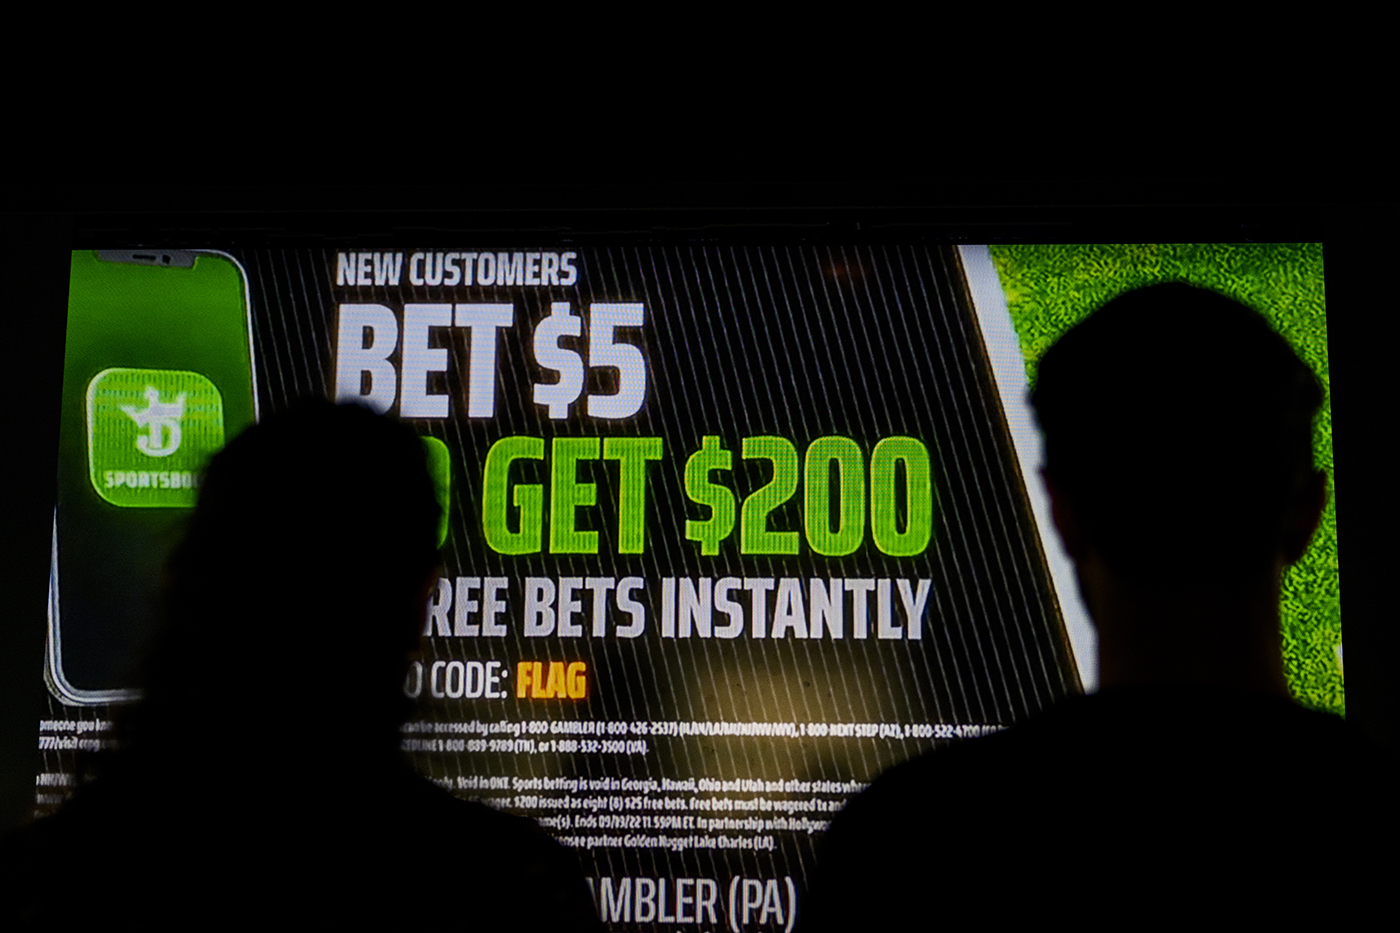 Photo: why so many sports betting ads